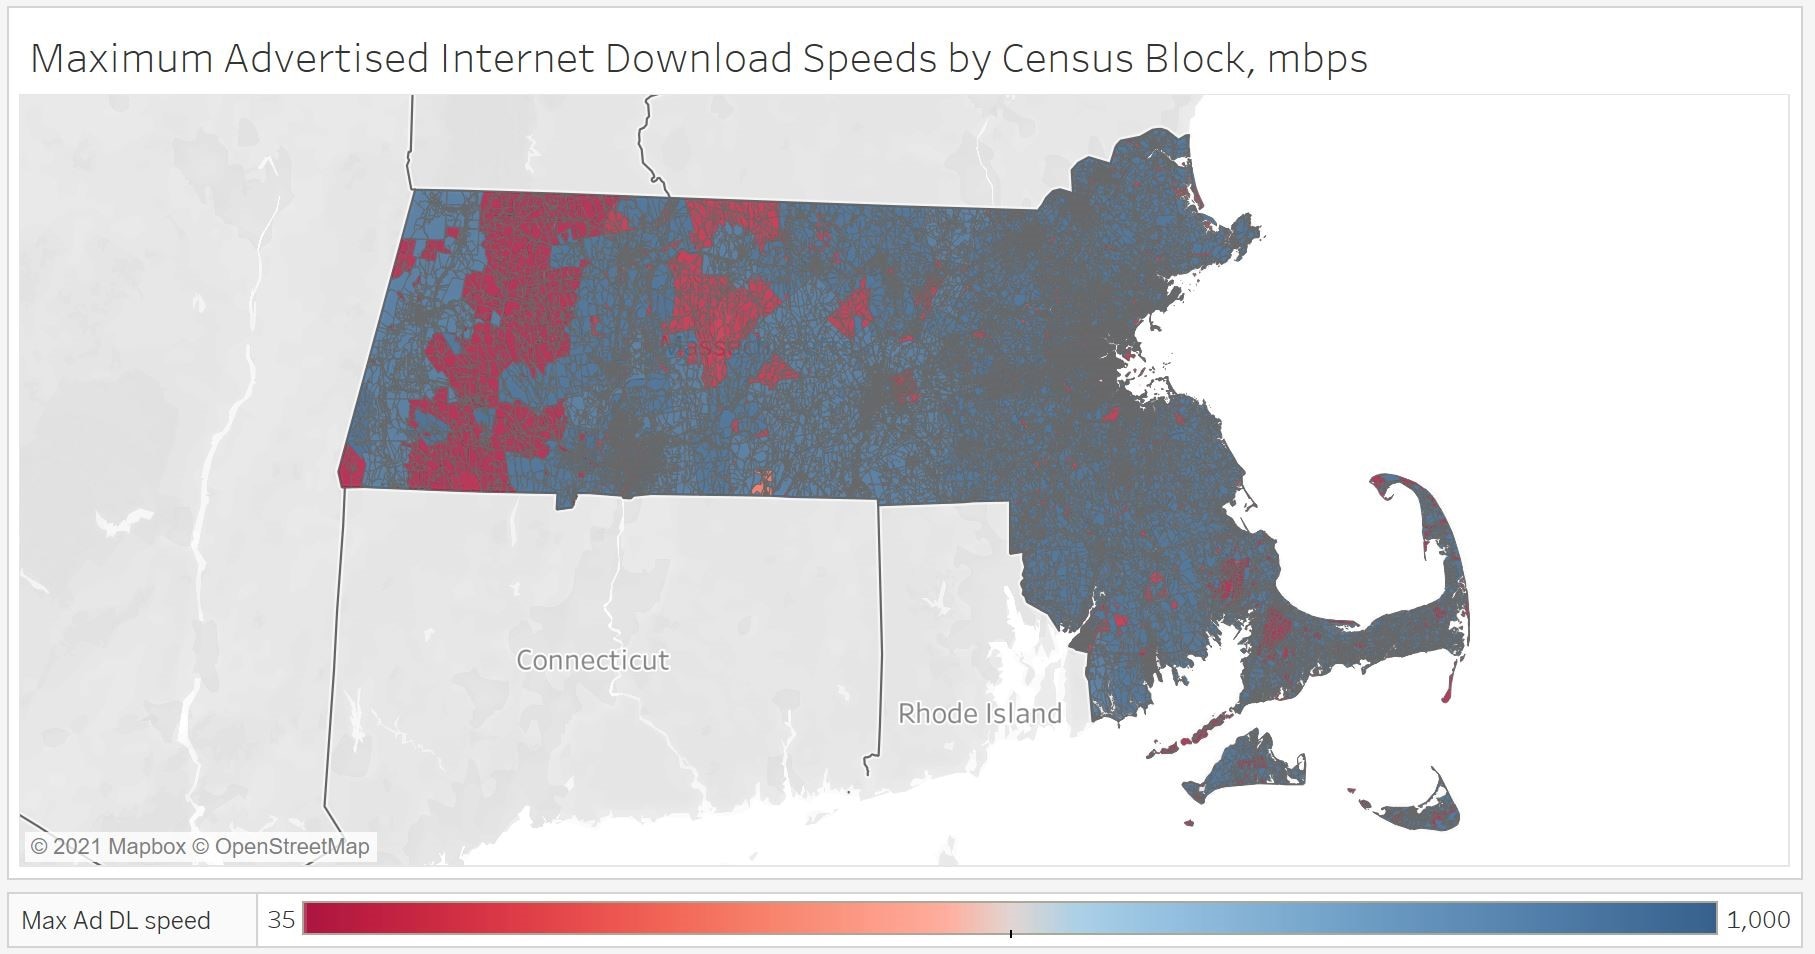 Figure 10–Maximum Advertised Internet Download Speeds by Census Block (Mbps)